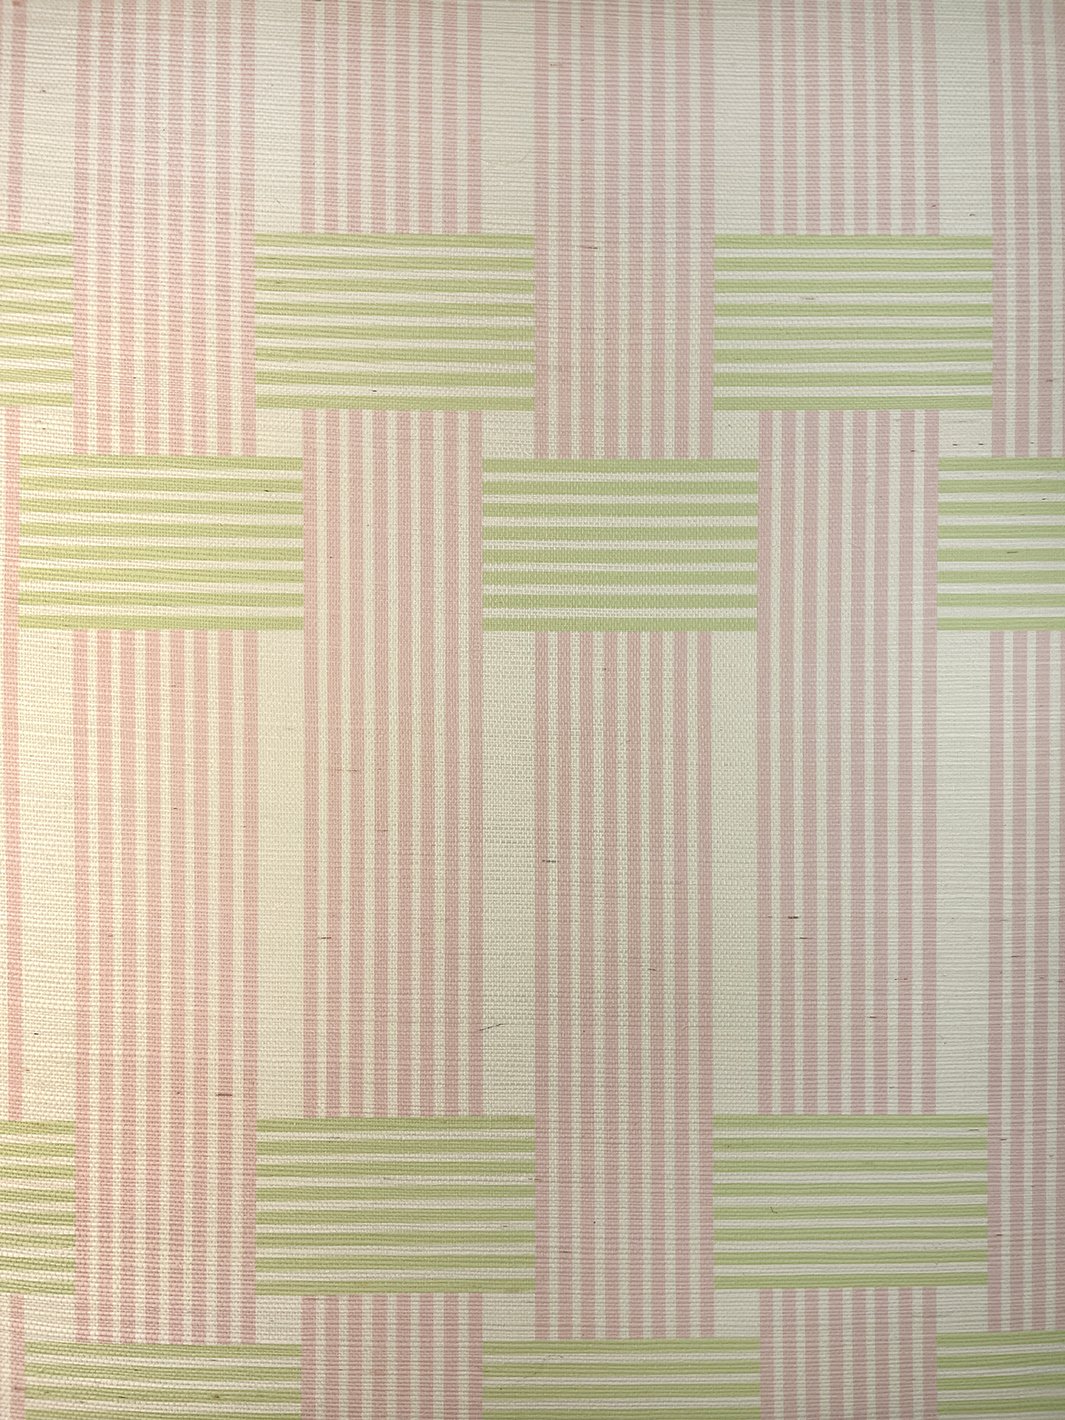 'Roman Holiday Woven' Grasscloth' Wallpaper by Barbie™ - Pink and Green